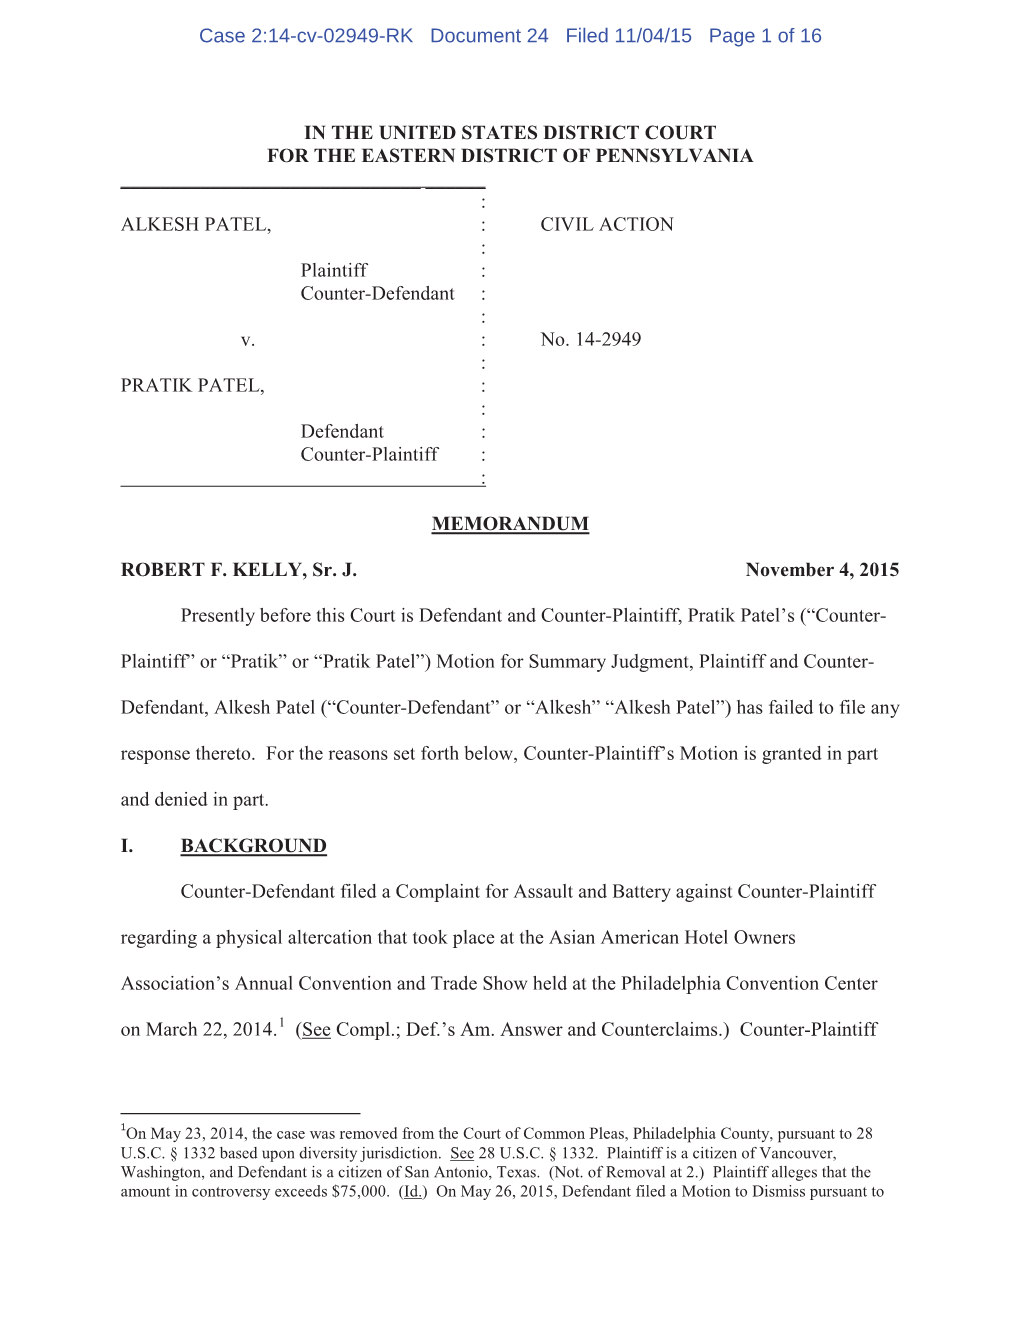 Case 2:14-Cv-02949-RK Document 24 Filed 11/04/15 Page 1 of 16